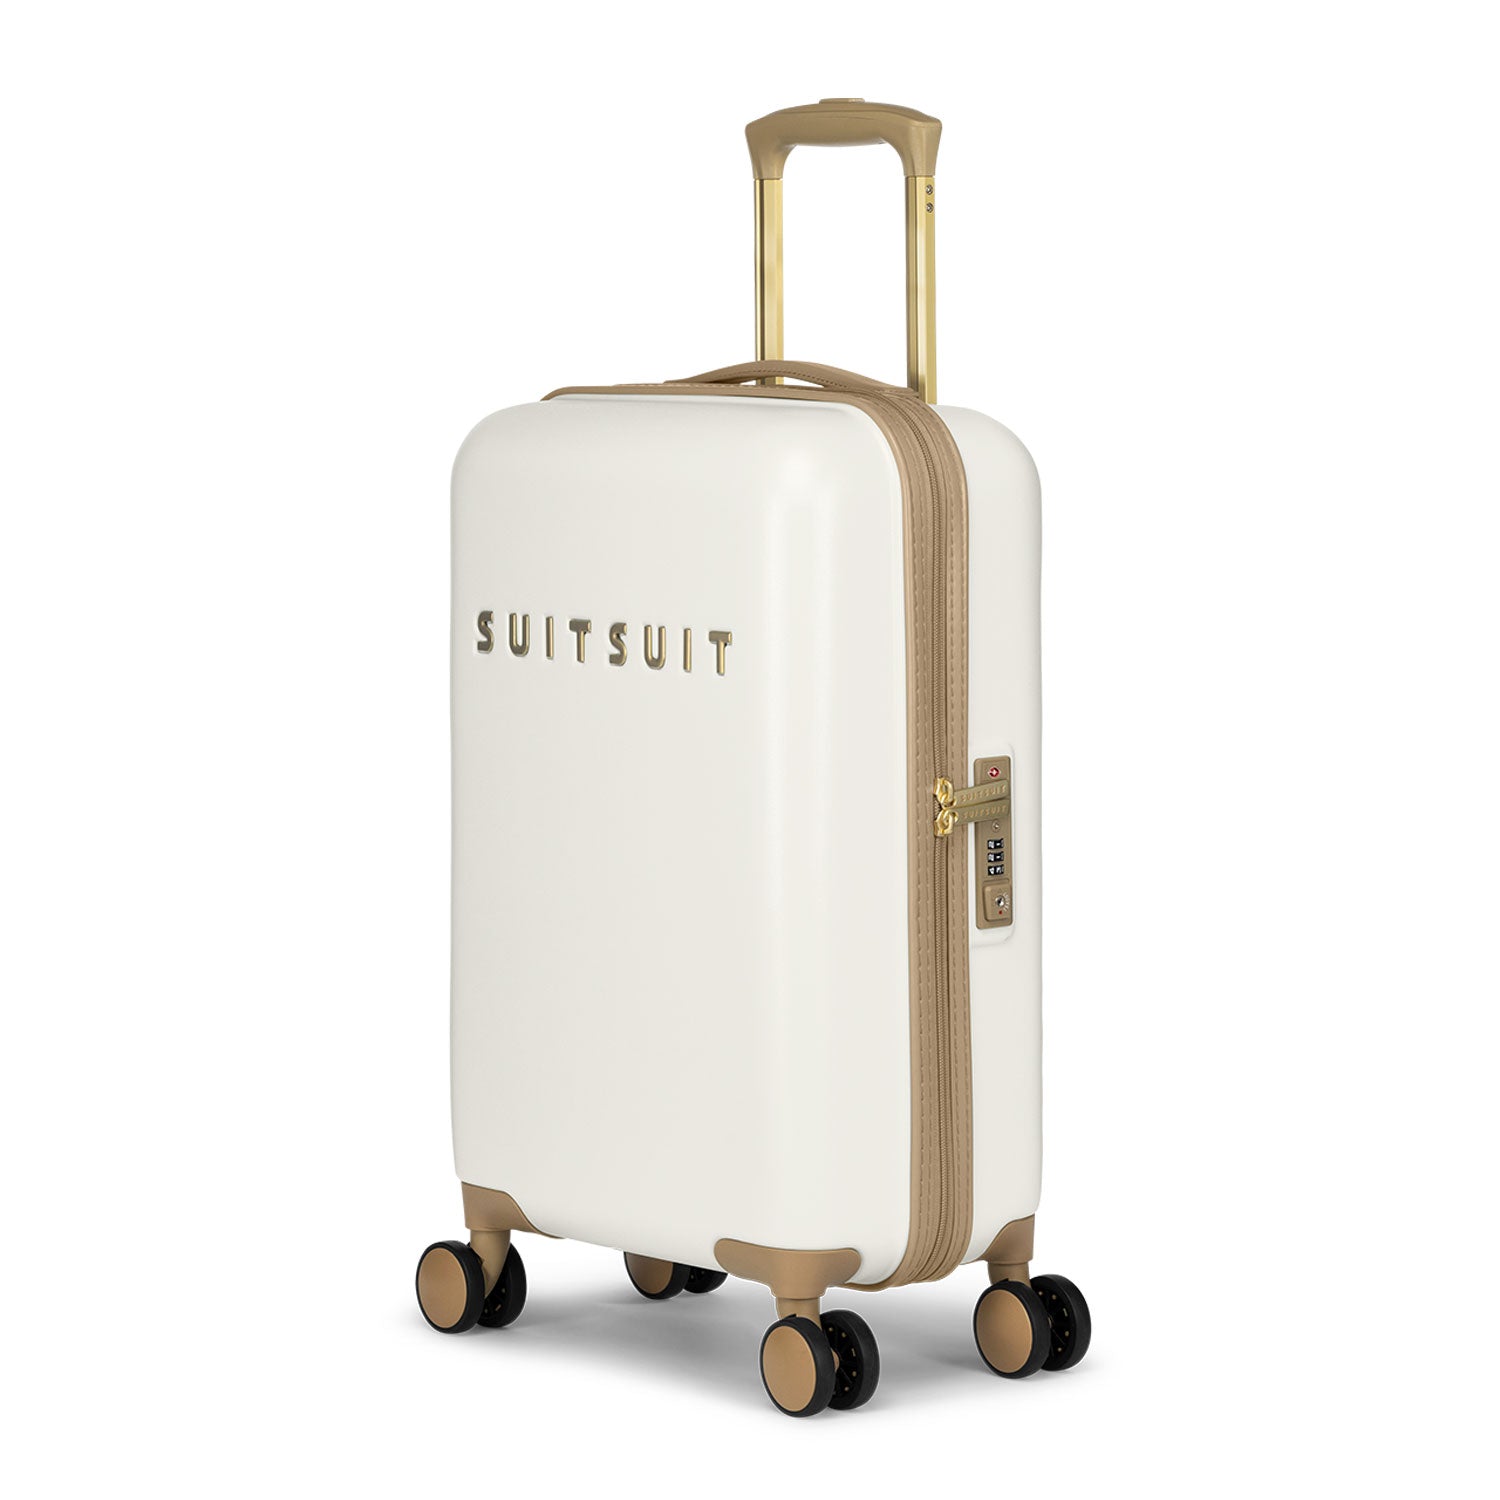 Fusion - White Swan - Carry-on (20 inch) – SUITSUIT International